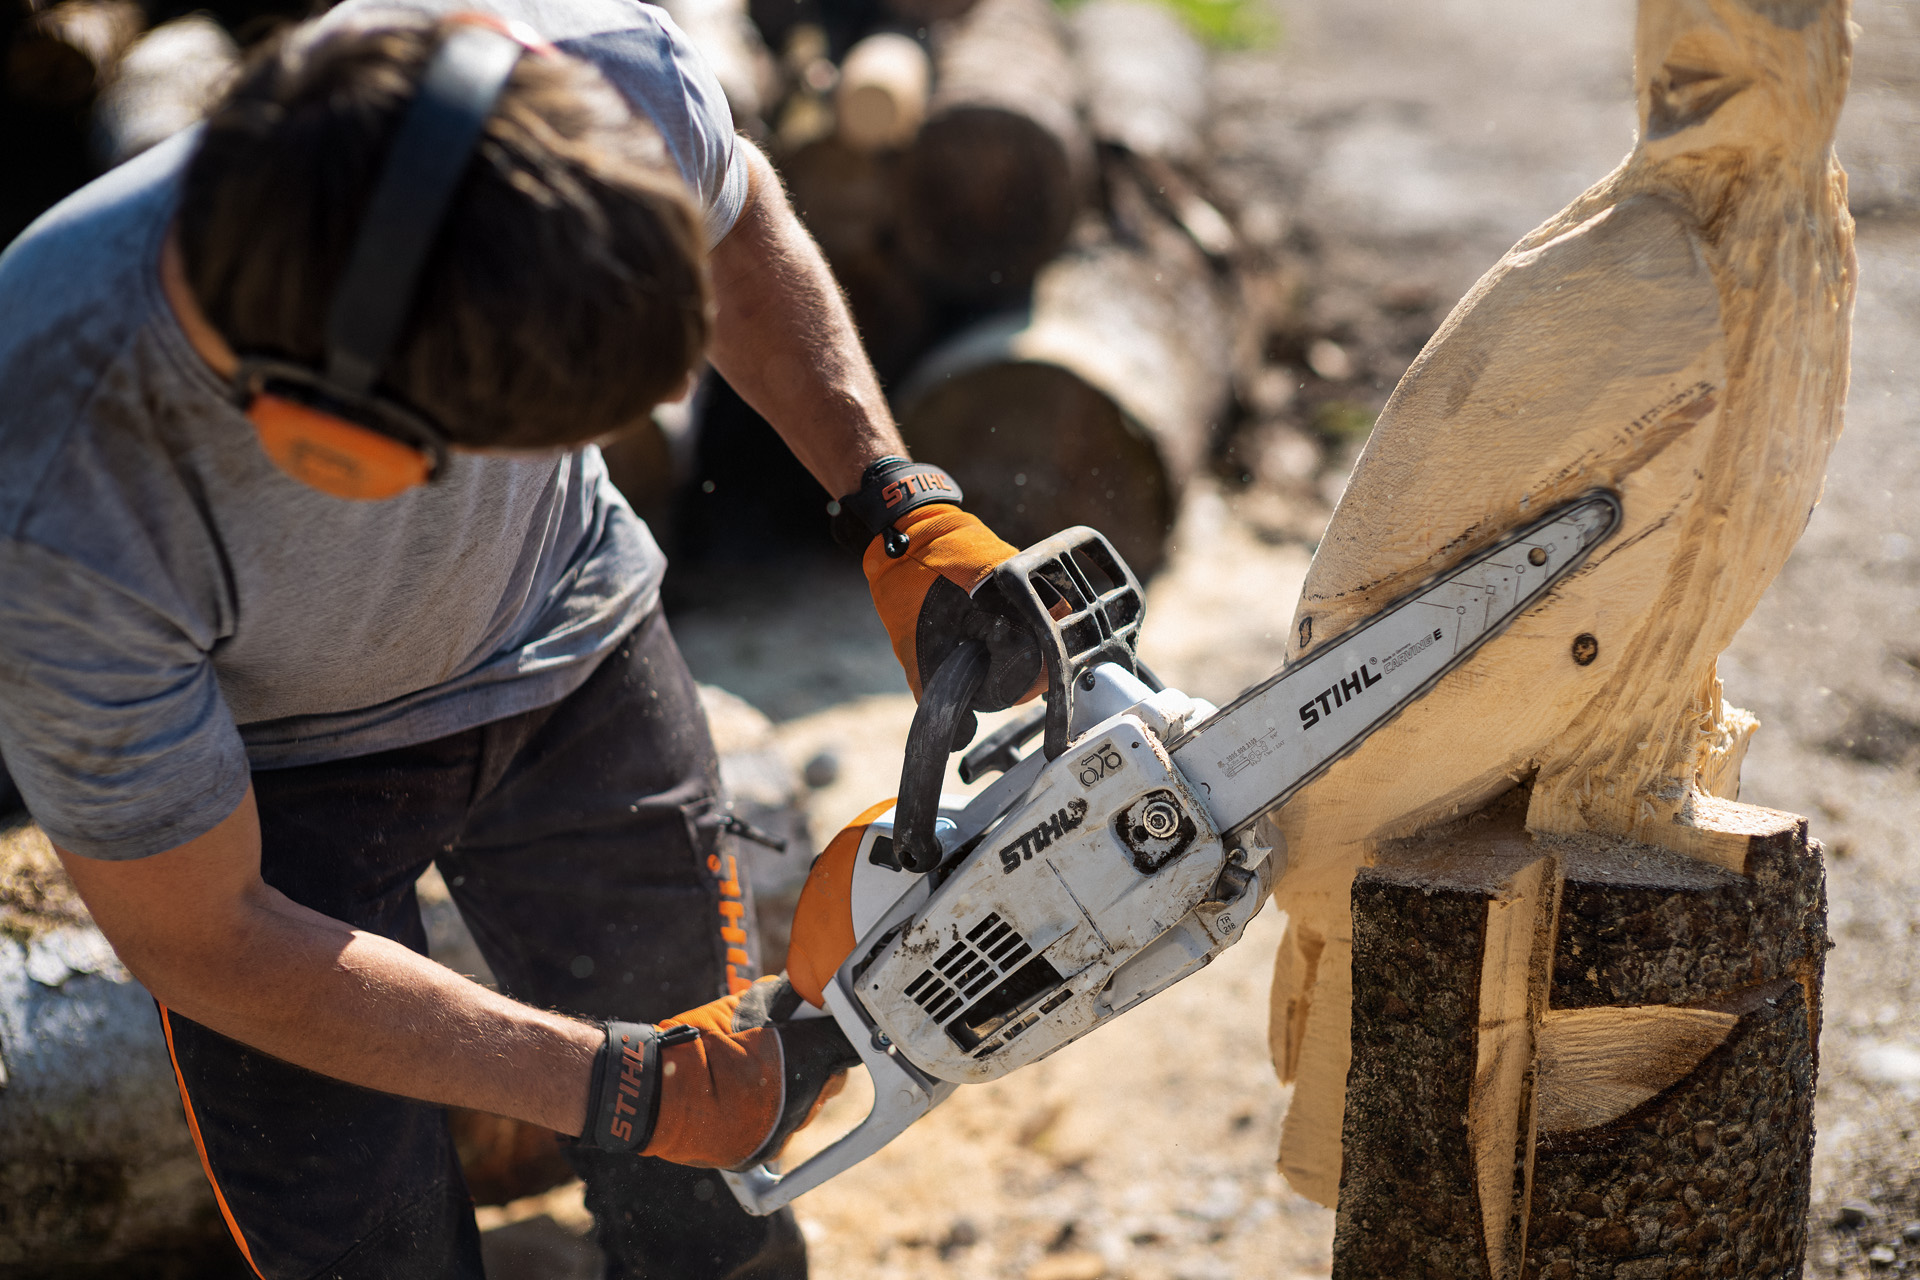 A man carving an owl with a STIHL chainsaw